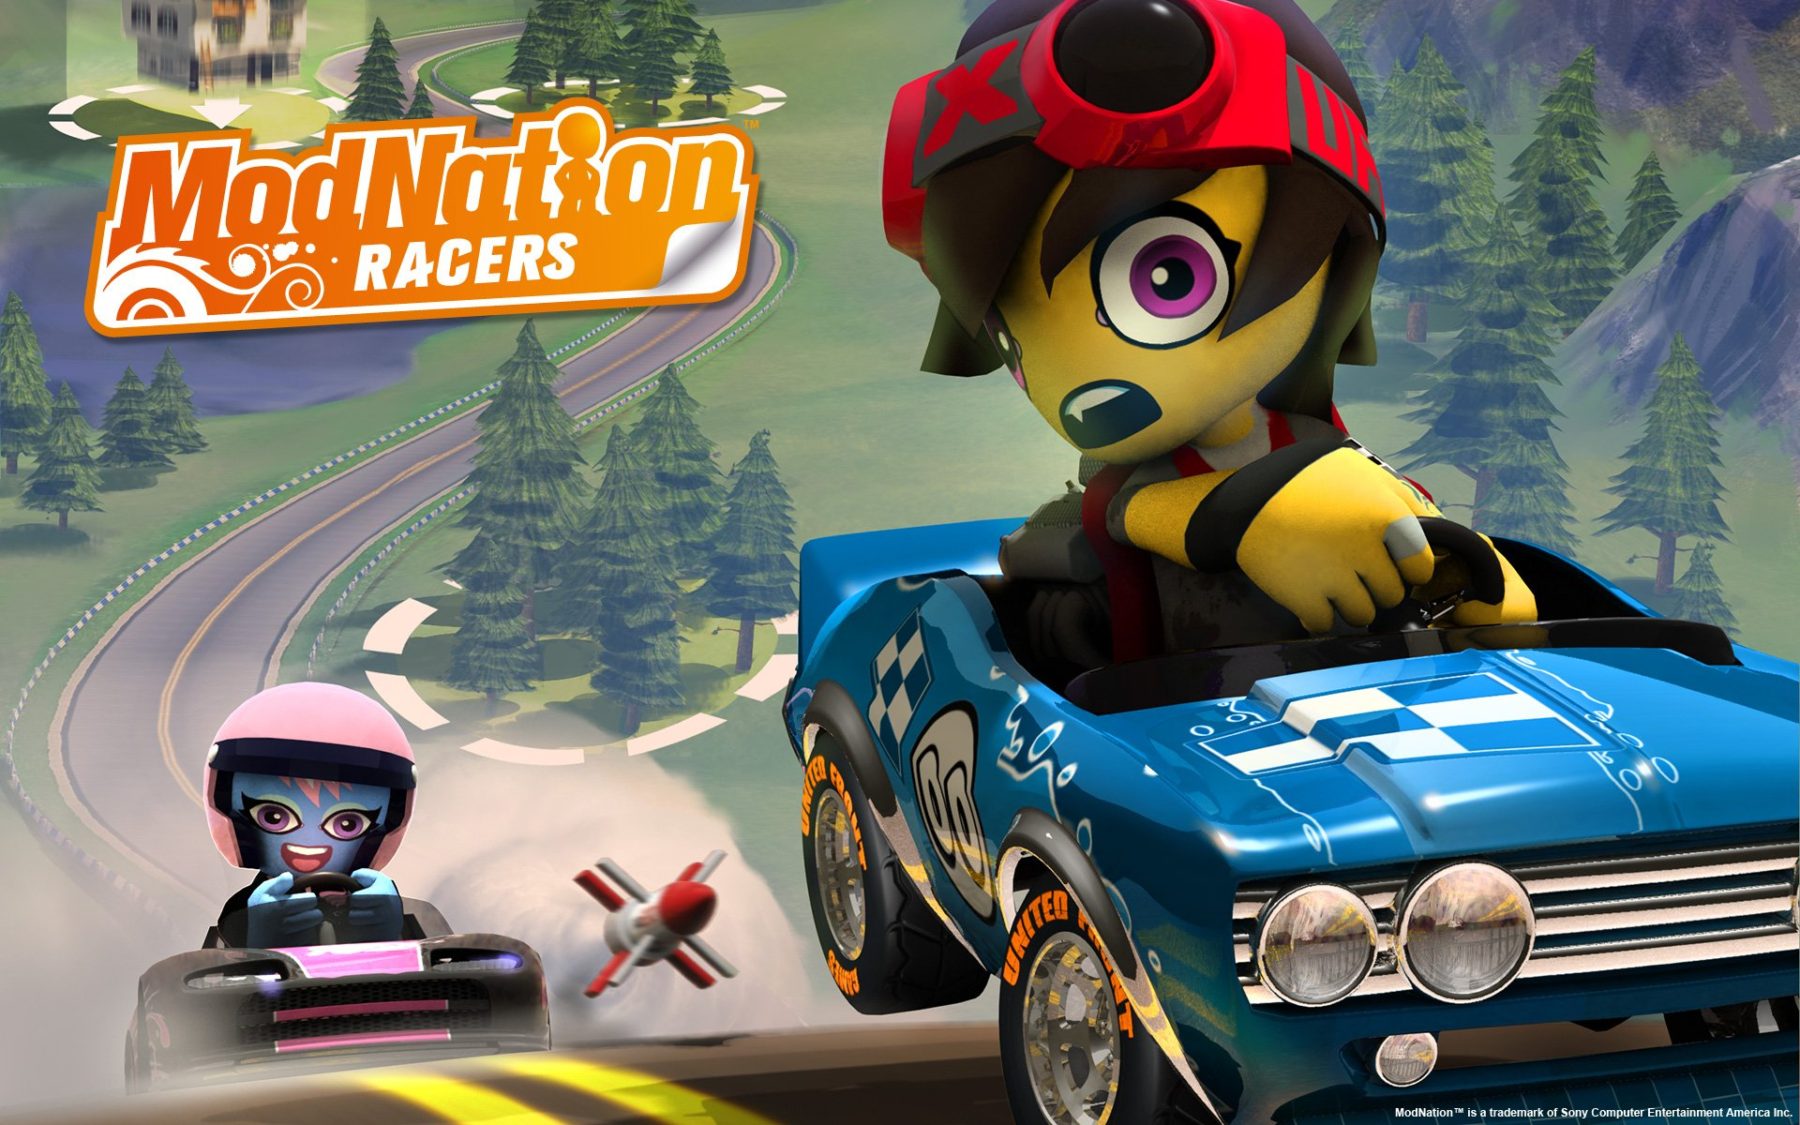 download mod nation racing for free